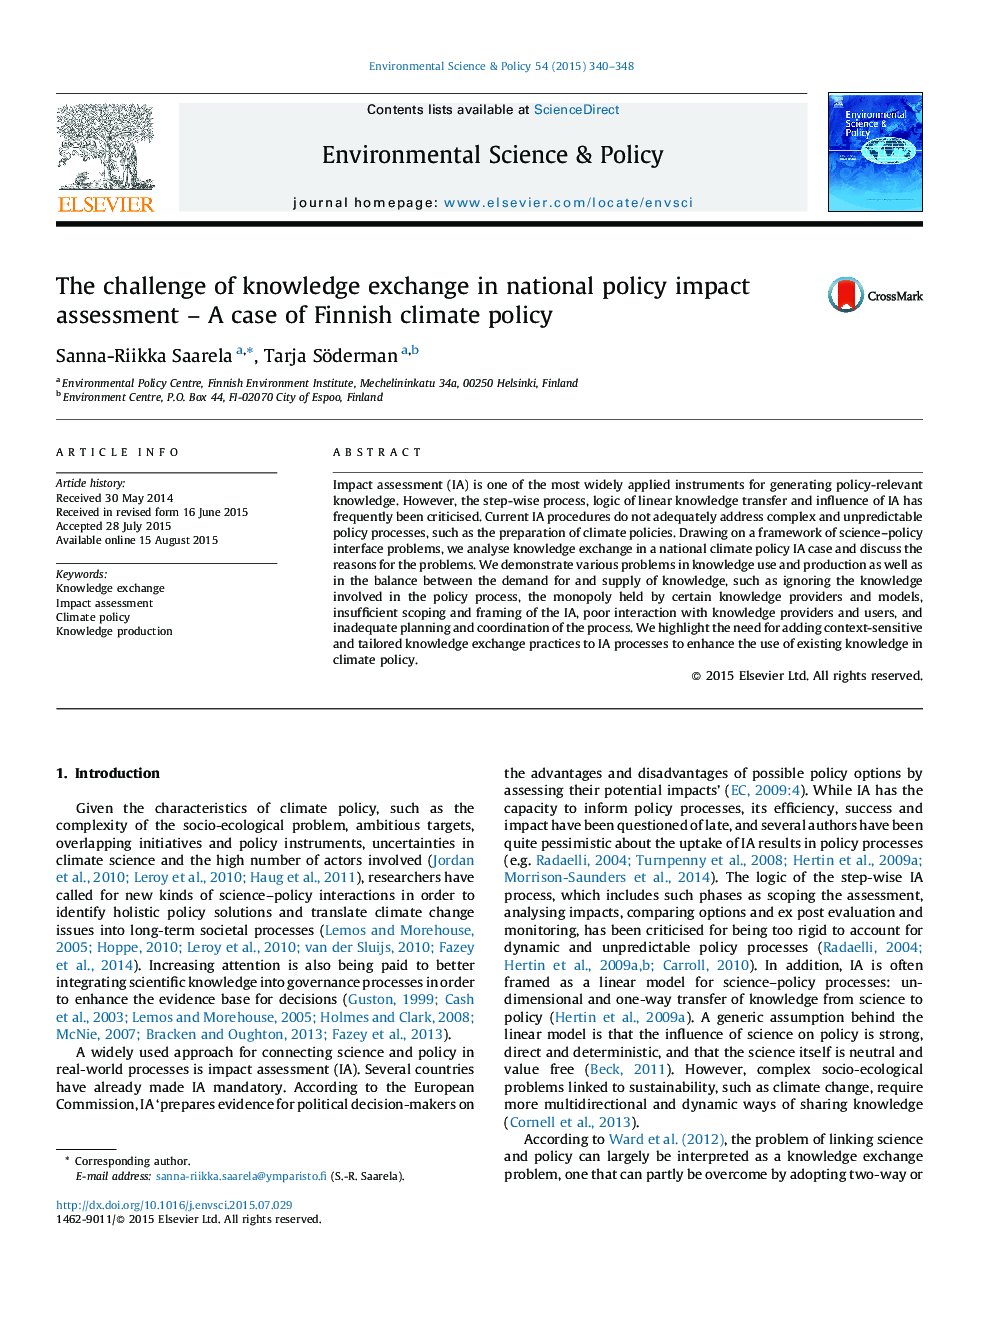 The challenge of knowledge exchange in national policy impact assessment - A case of Finnish climate policy